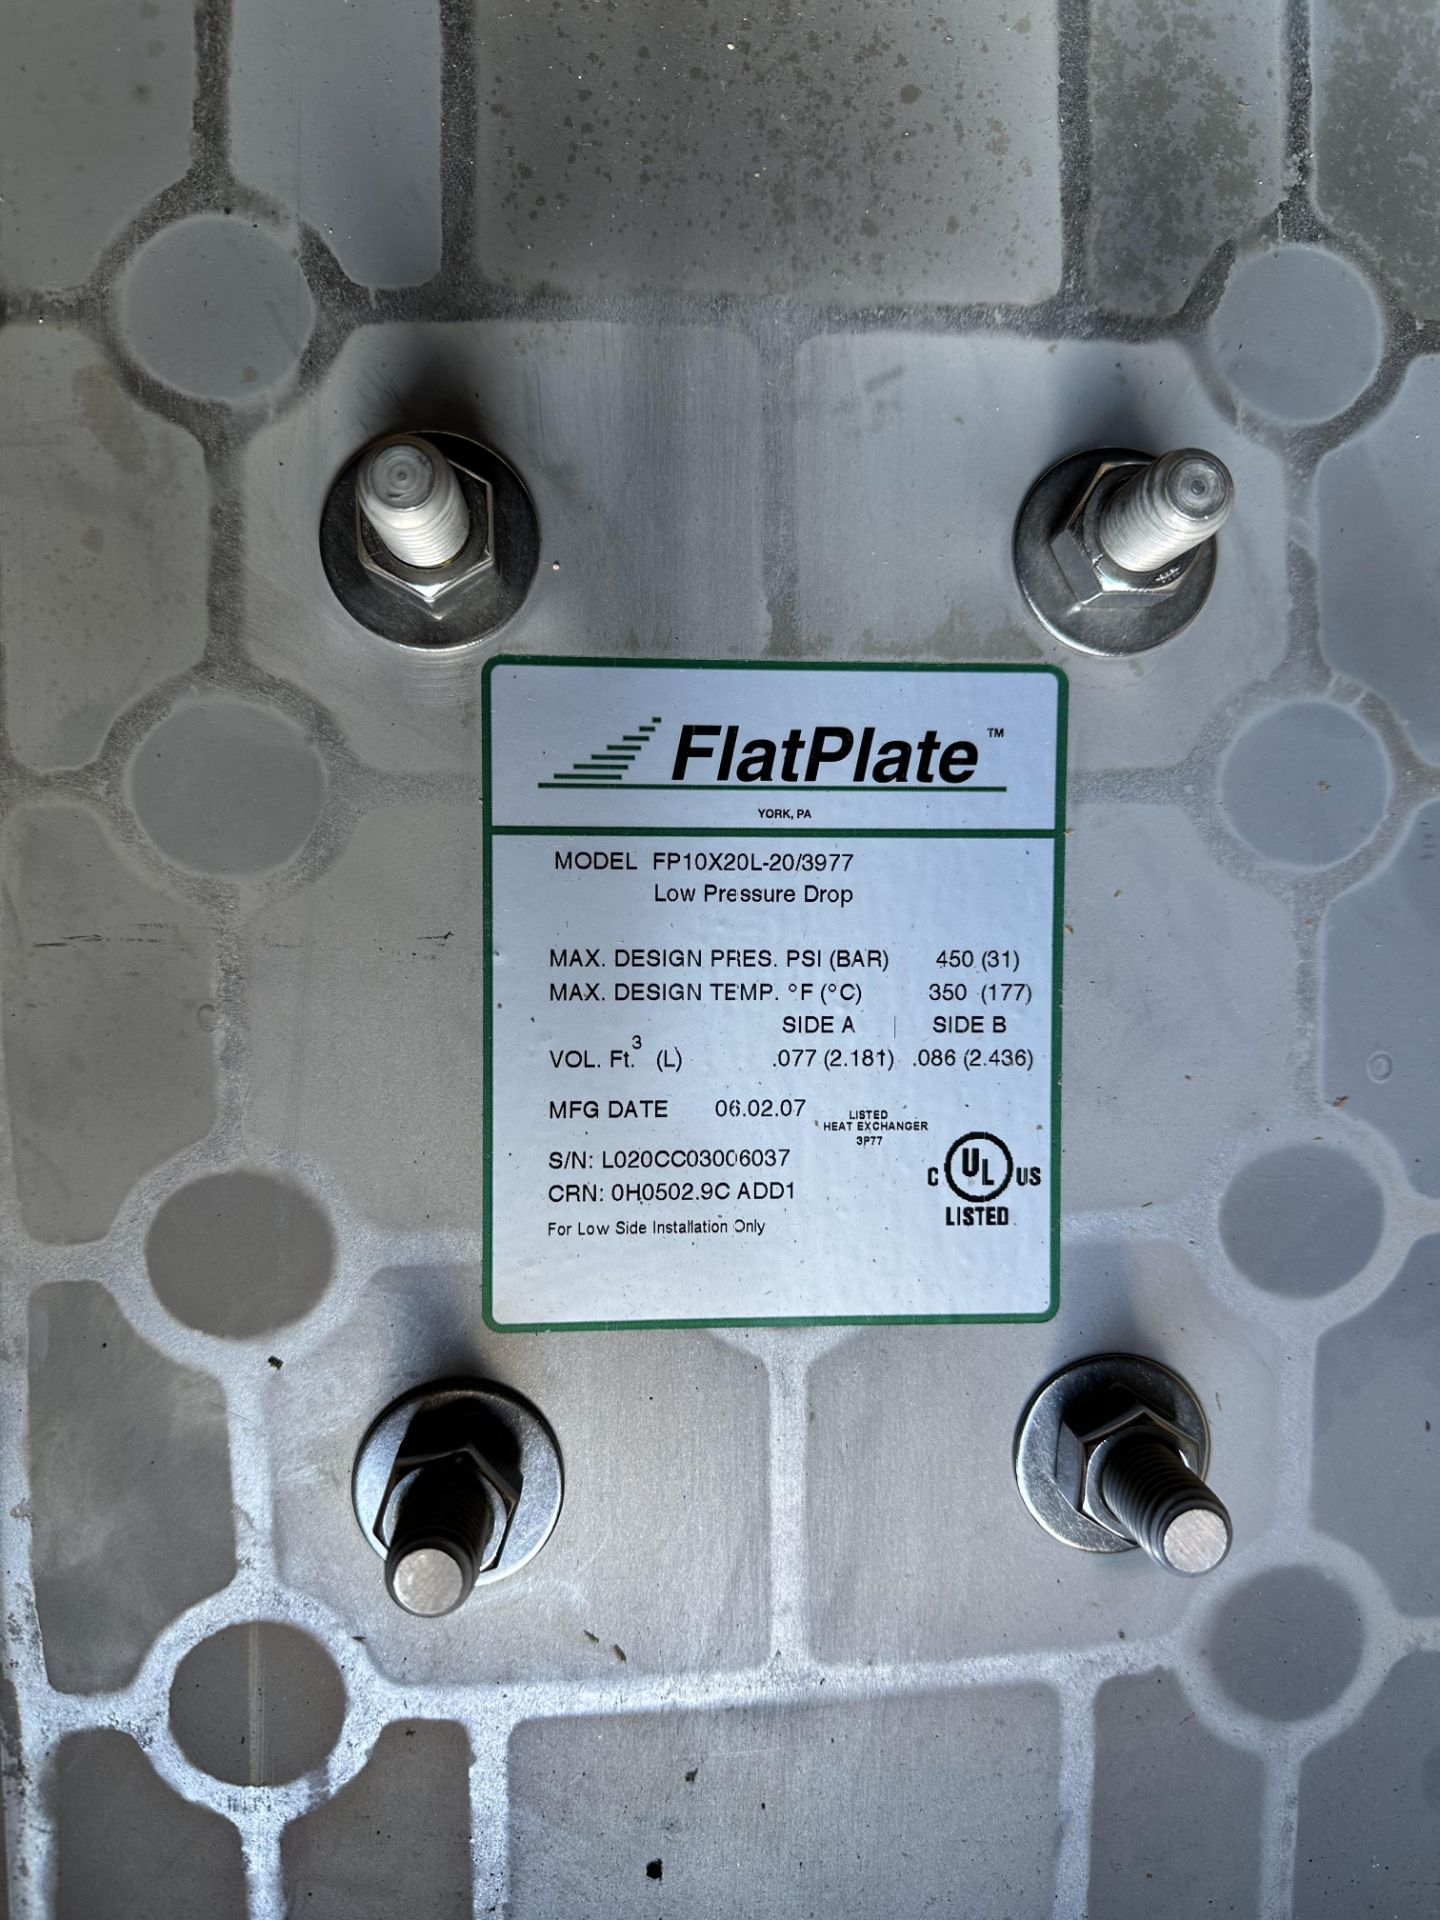 Lot of (5) New/Still-In-Box FlatPlate Heat Exchanger Plates. All Model FP10x20L-20/3977 - Image 2 of 2